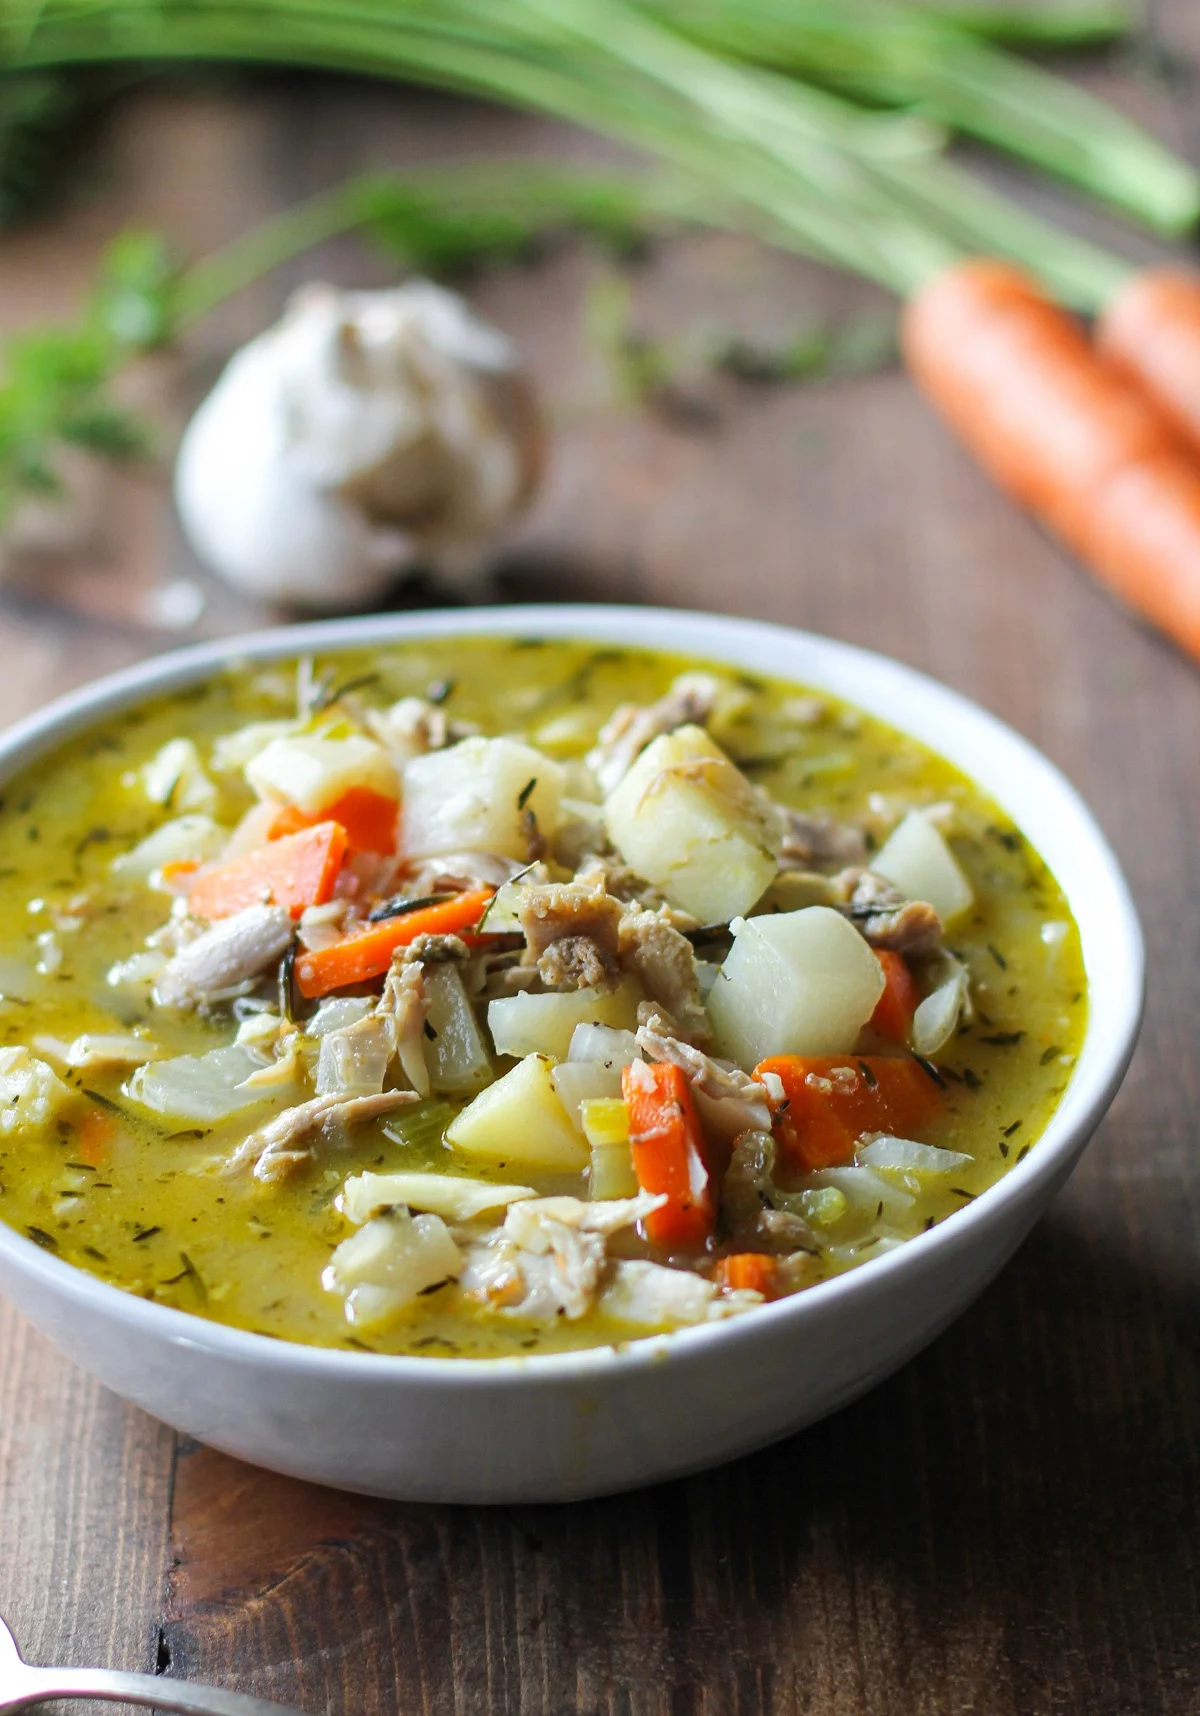 Turkey Soup with Root Vegetables - made using leftover Thanksgiving turkey!